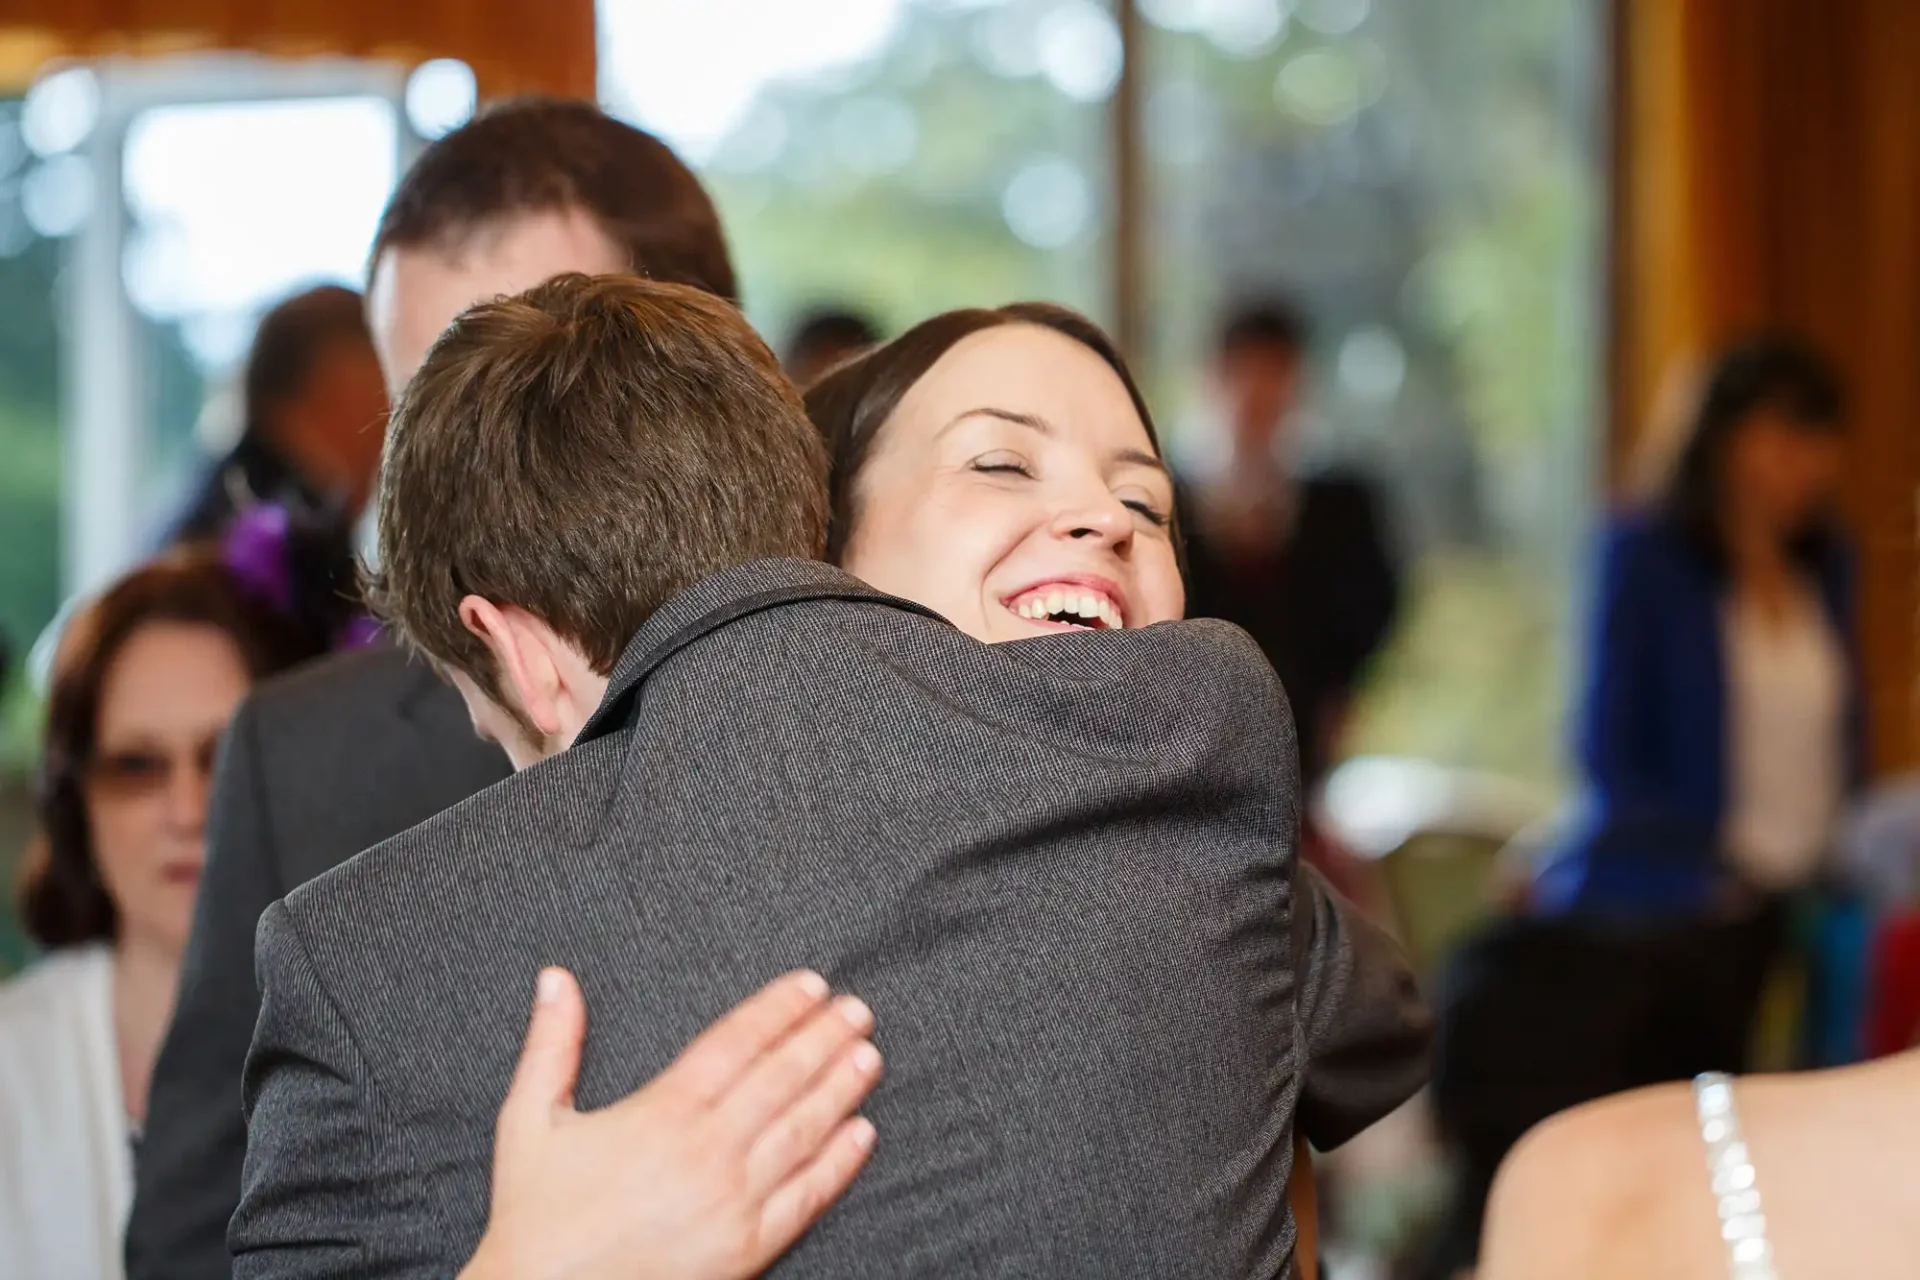 Woman smiling broadly while hugging a man at a social gathering, with other people in soft focus in the background.